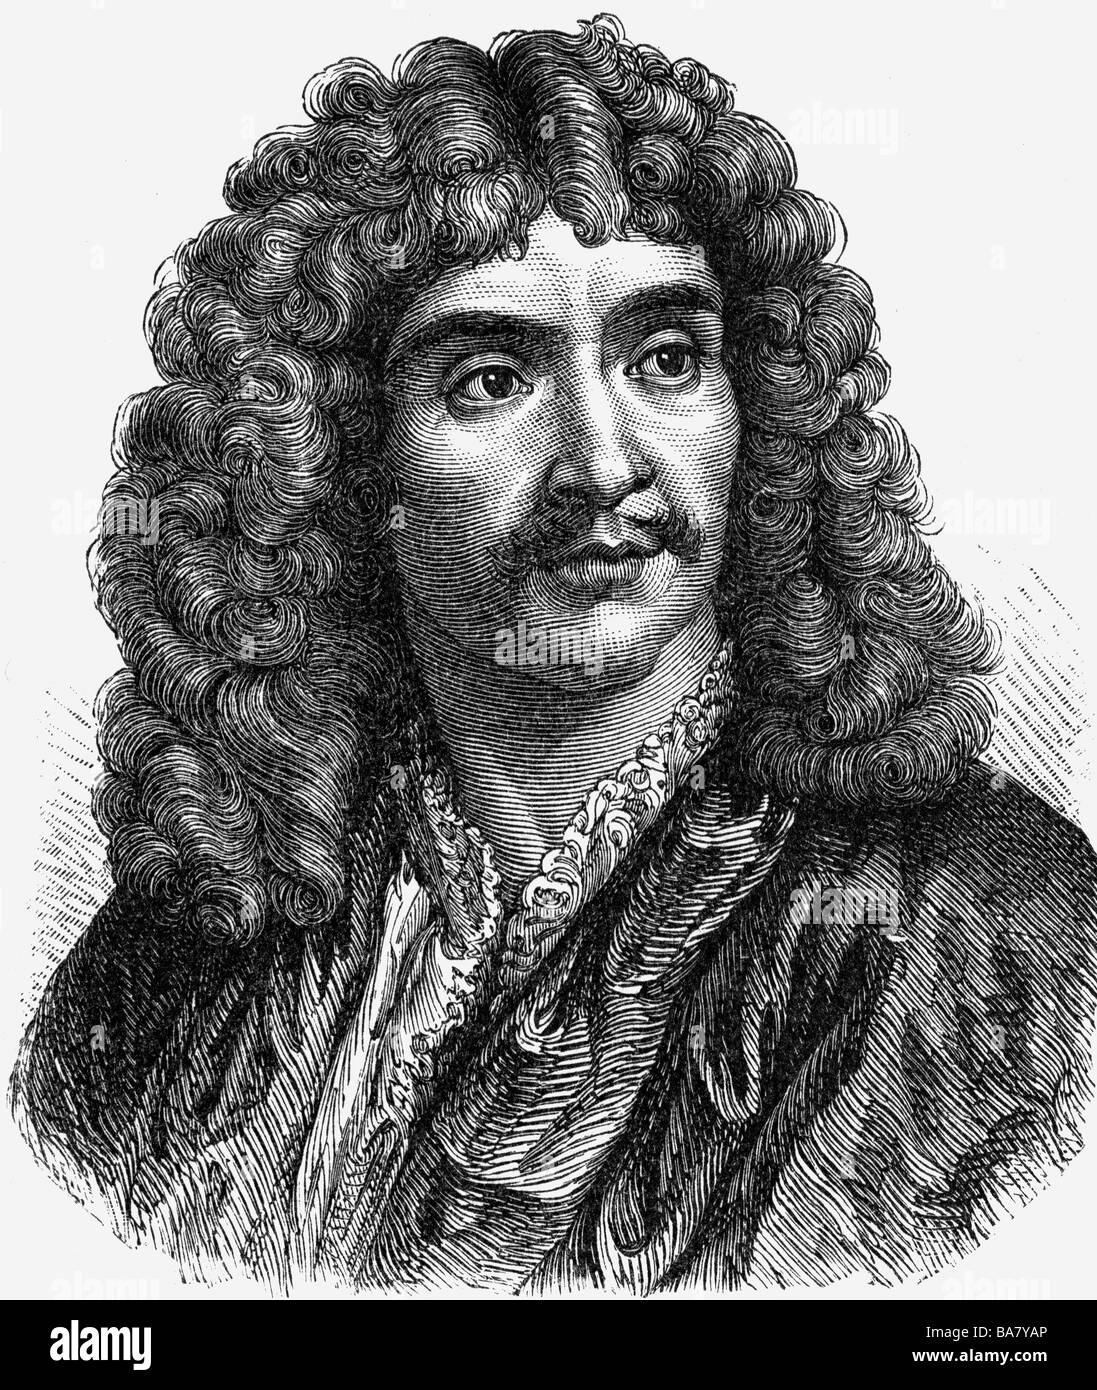 Moliere, 15.1.1622 - 17.2.1673, French author / writer, portrait, wood engraving, 19th century, , Stock Photo